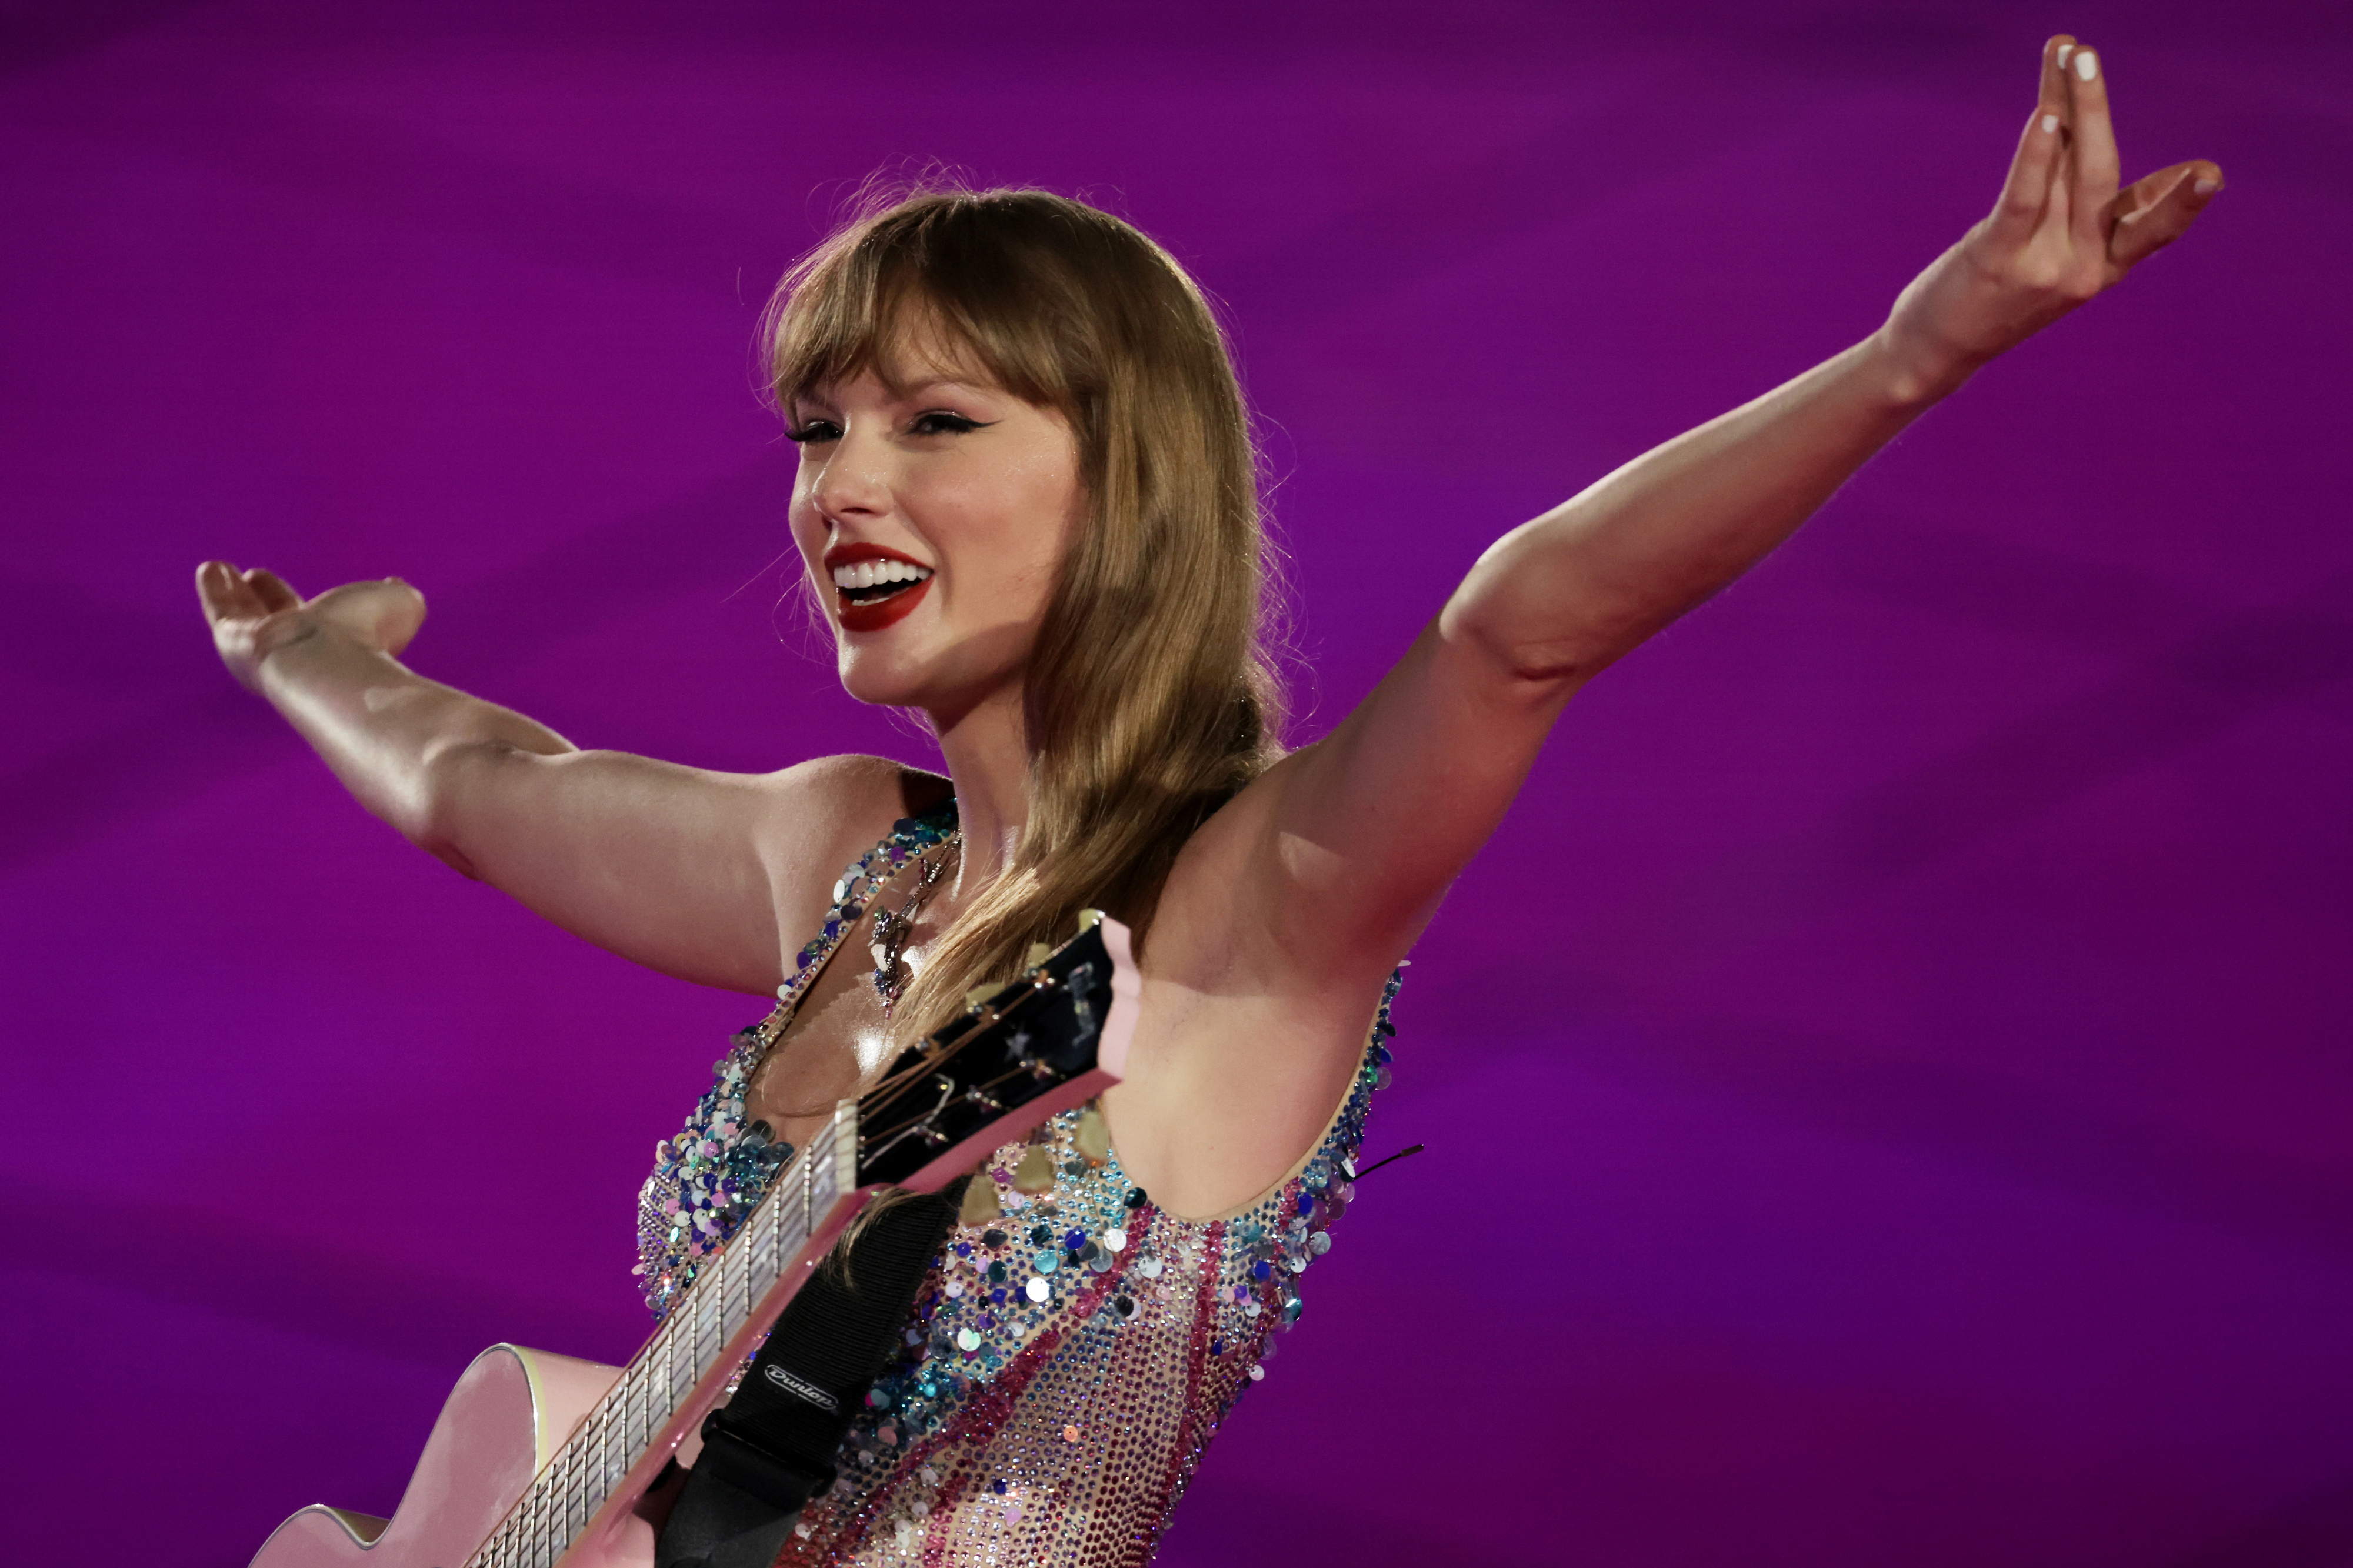 Taylor Swift performing with a guitar, wearing a sparkling dress, arms wide open